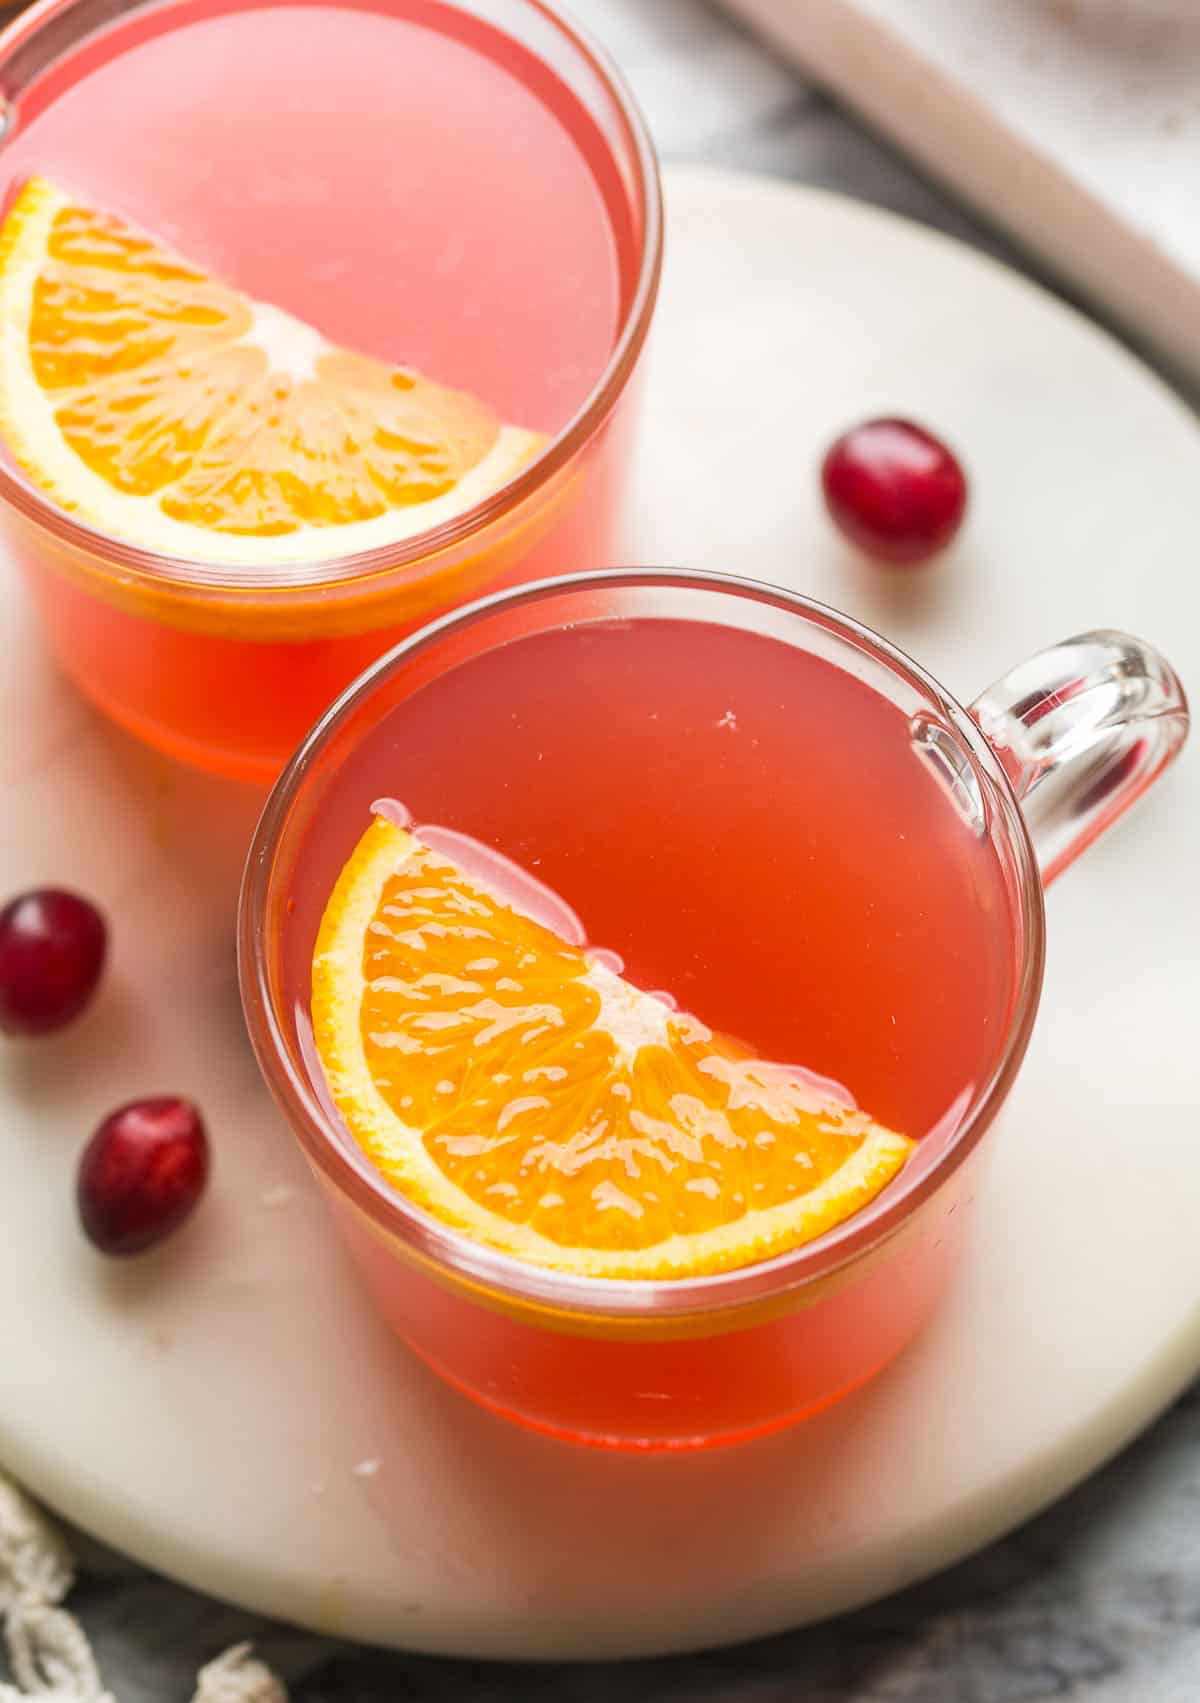 A glass mug containing a pink drink with half an orange slice.